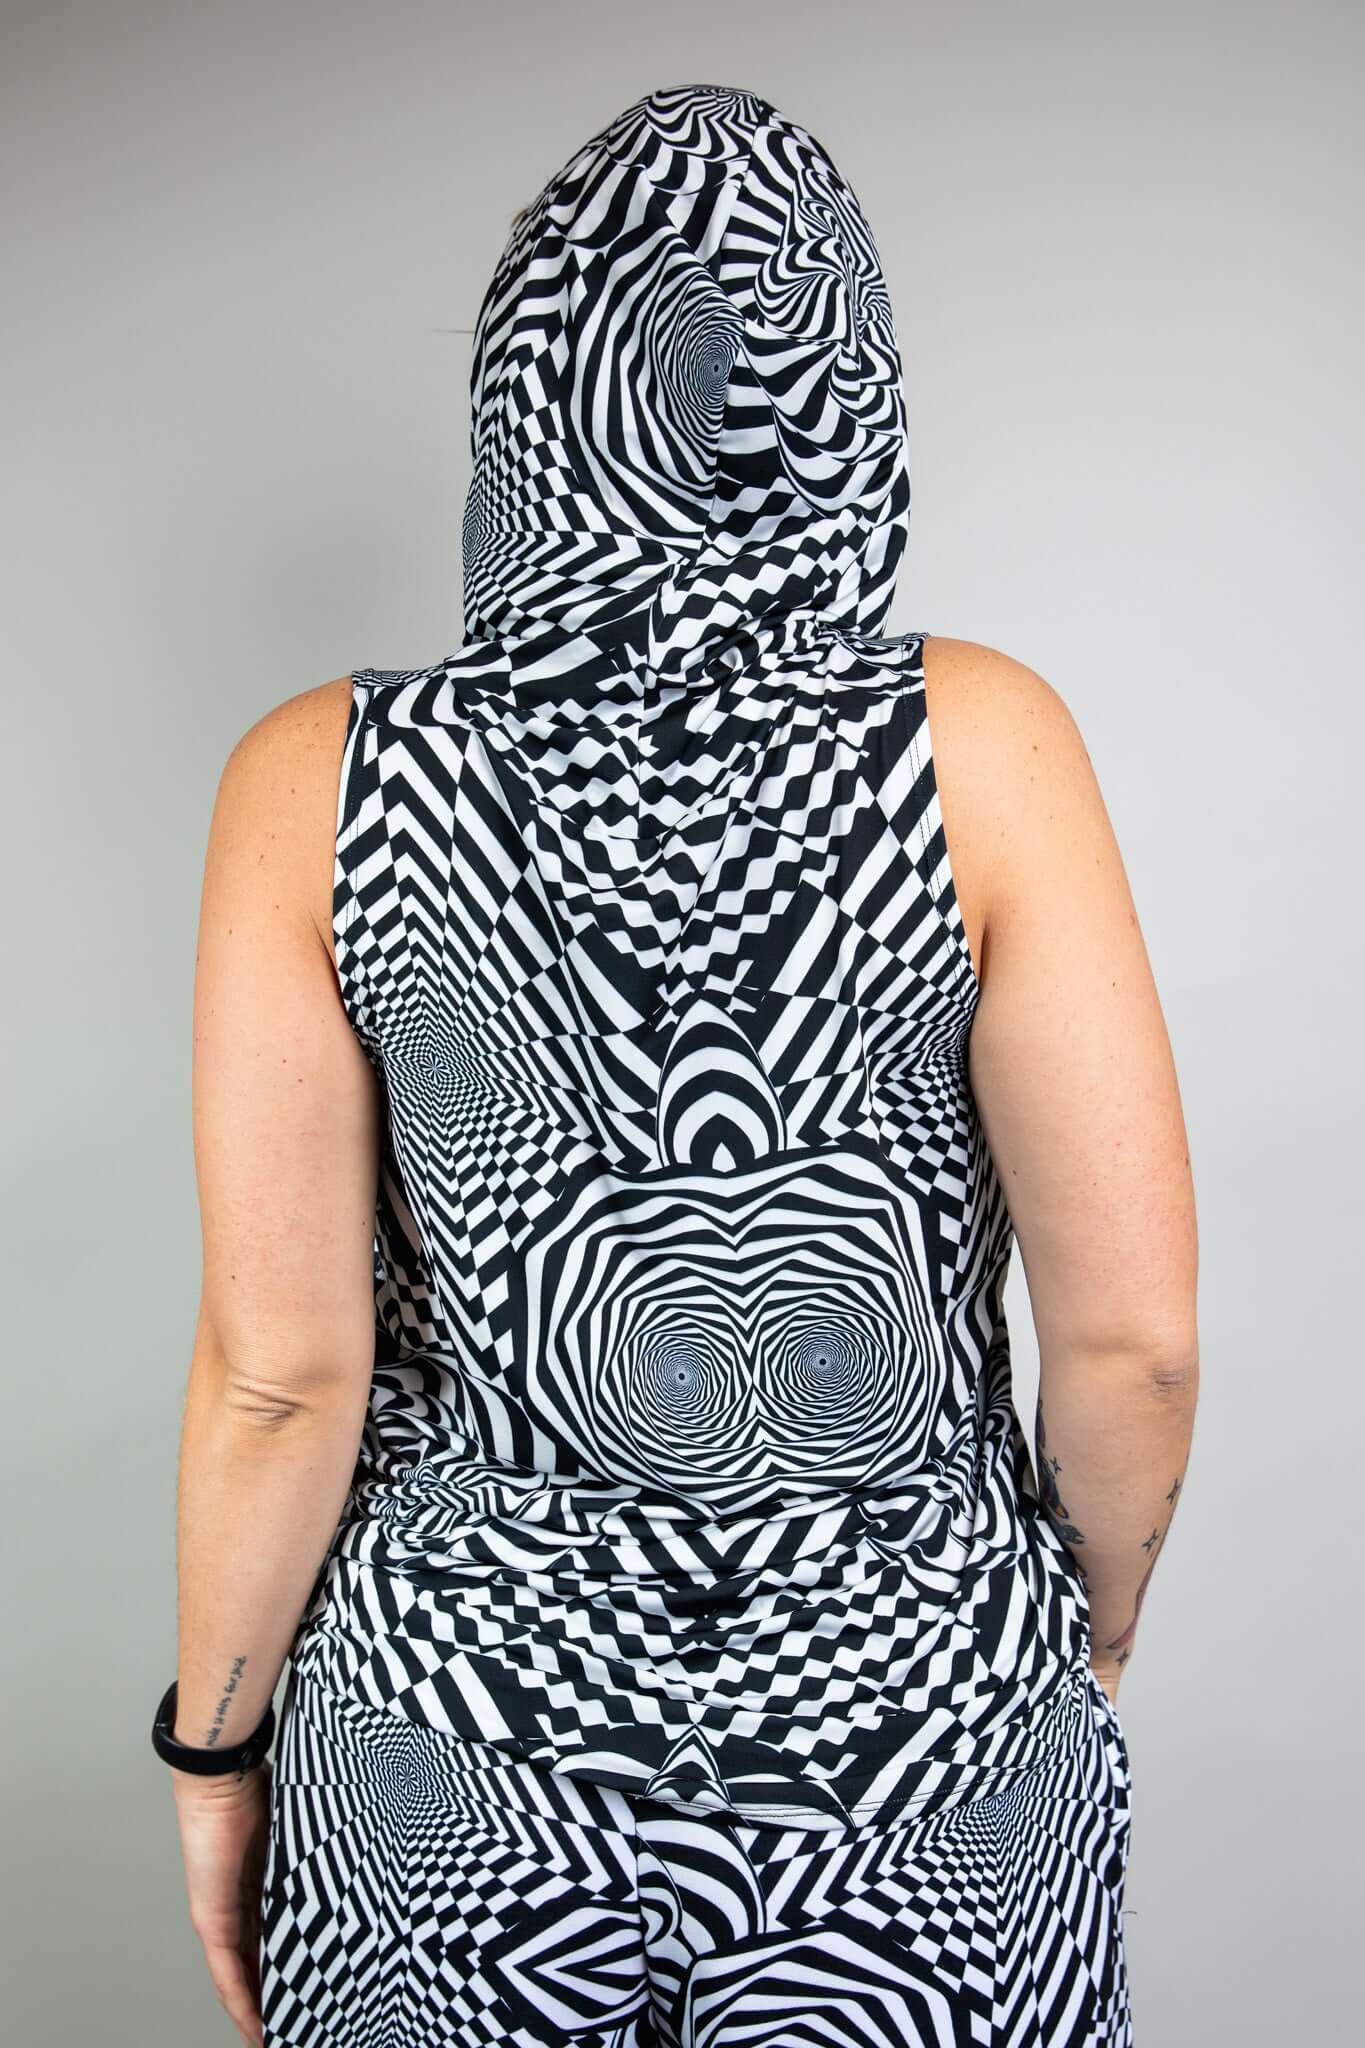 A person wearing a black and white geometric printed hooded tank top and matching pants. They are facing away from the camera.